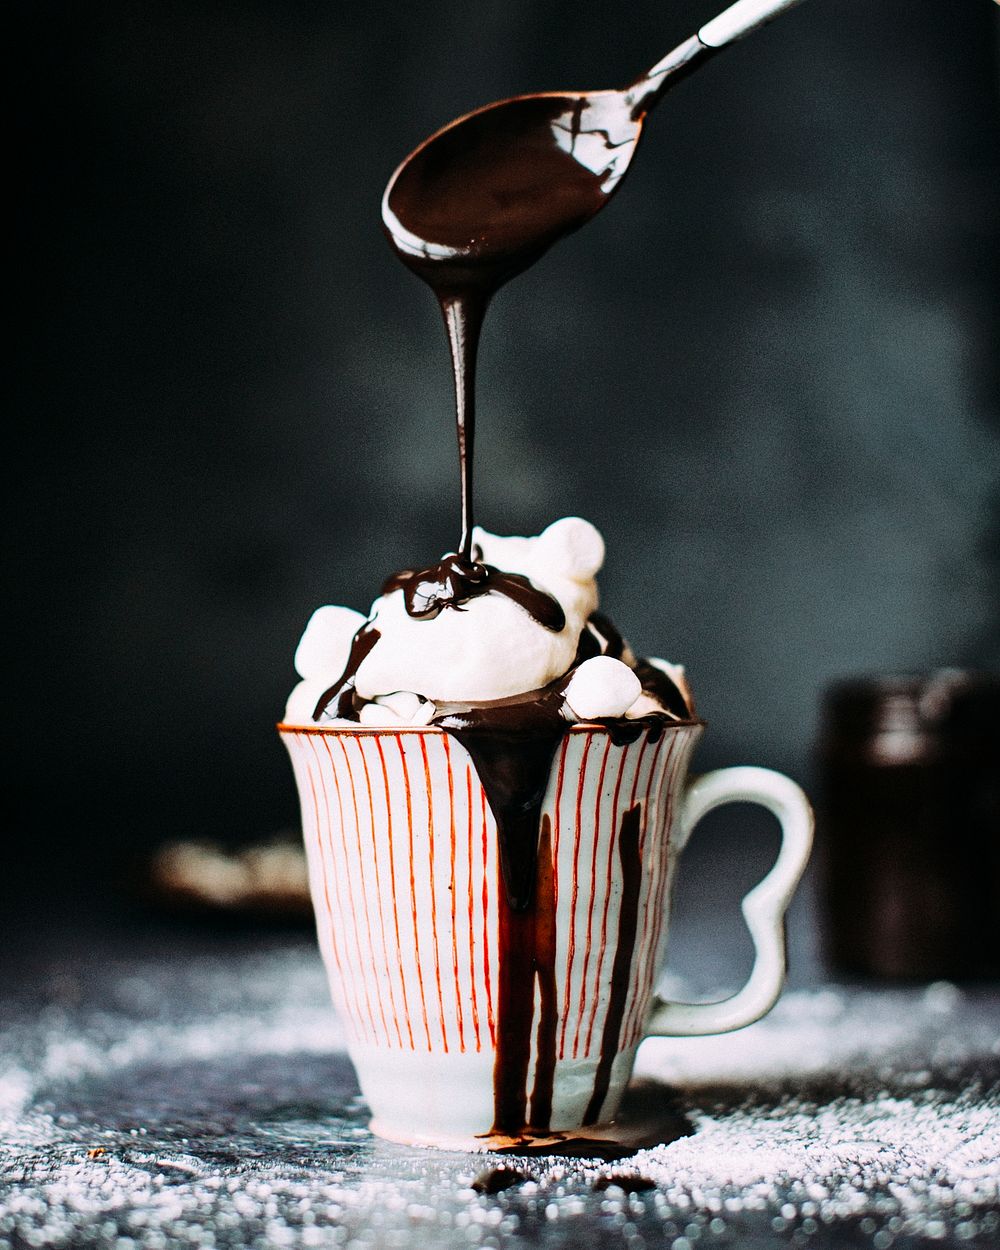 Hot chocolate with marshmallow and chocolate sauce. Original public domain image from Wikimedia Commons